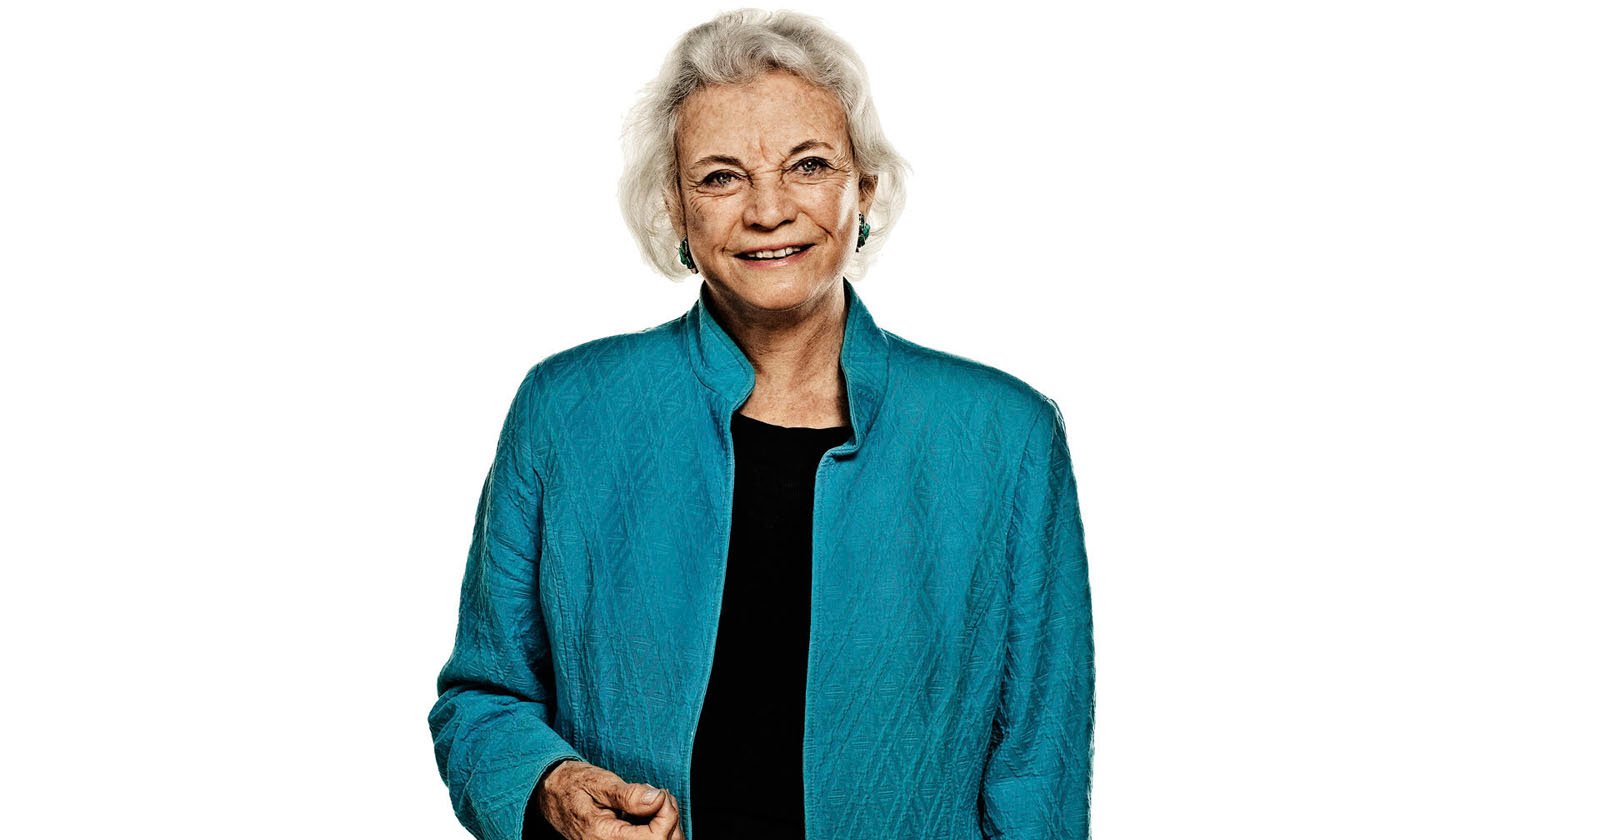  remembering sandra day connor incredible photo shoot 